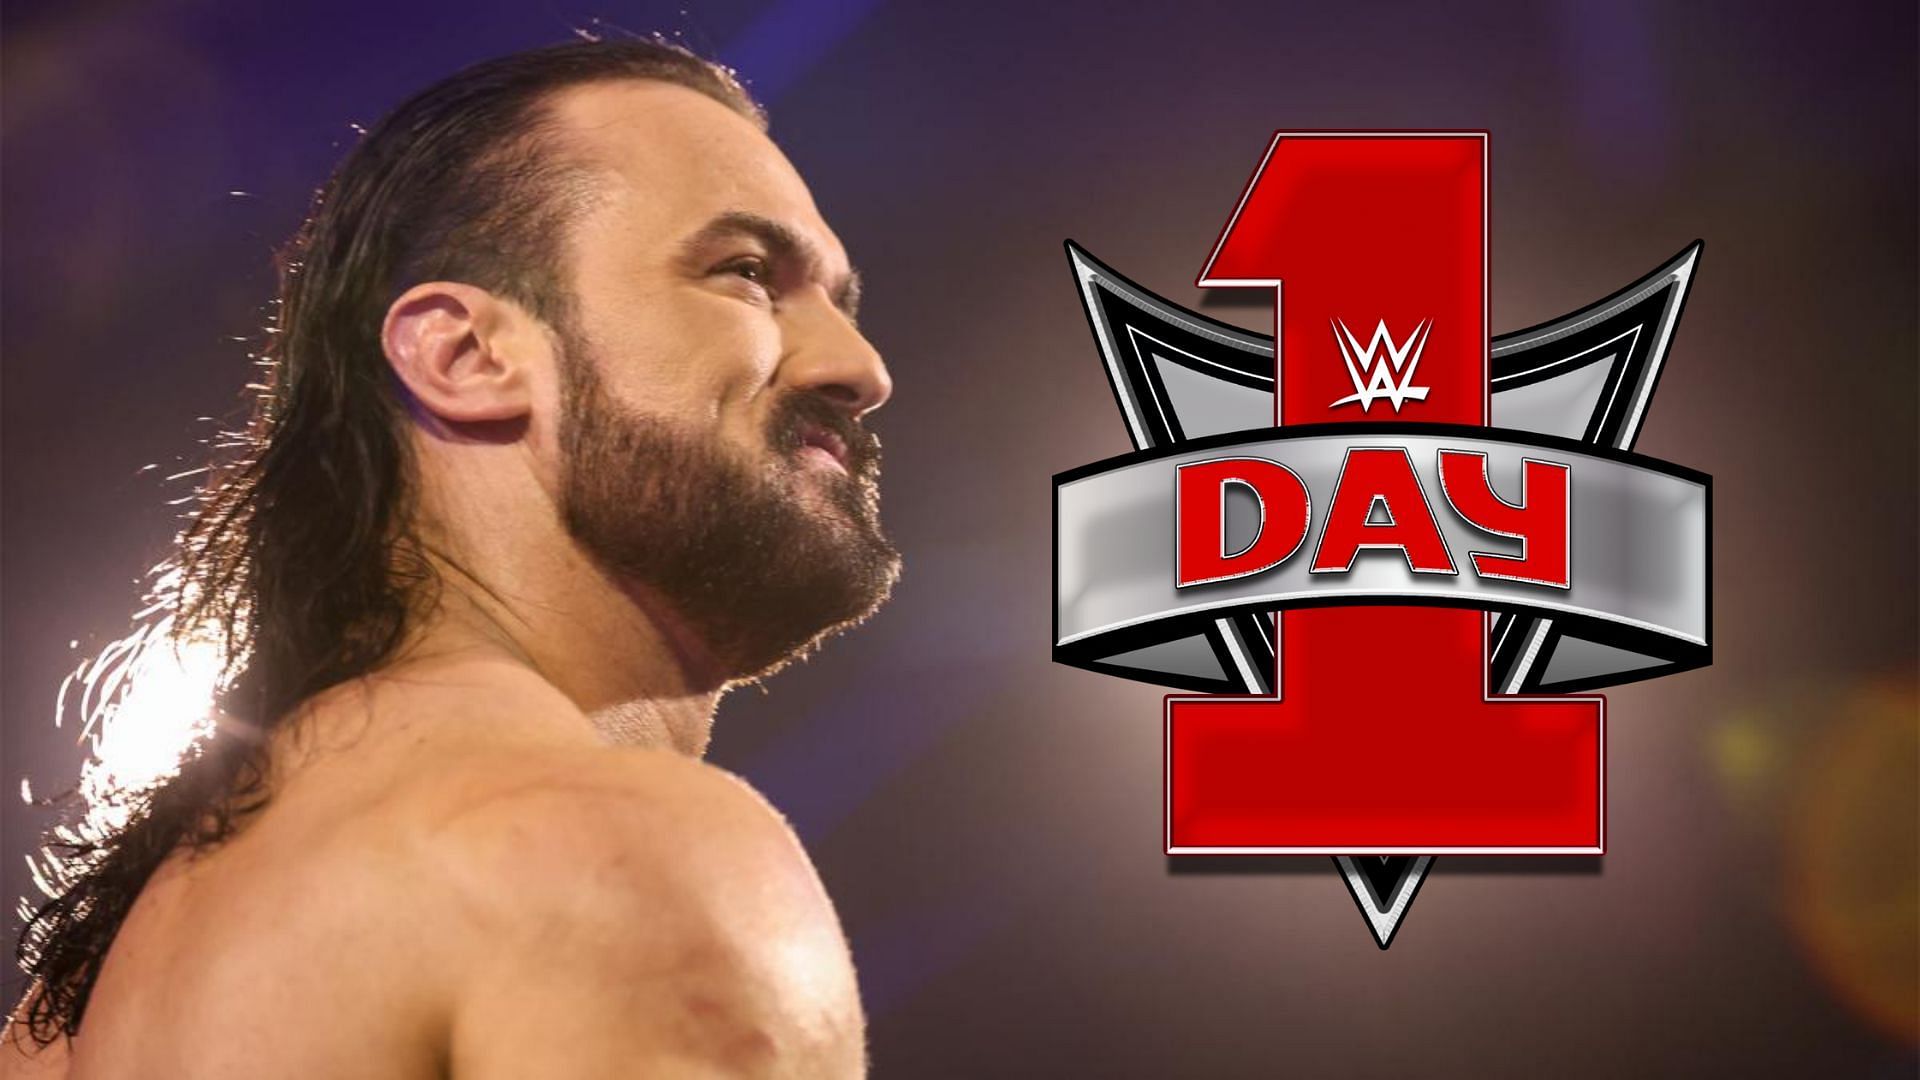 Drew McIntyre will face Madcap Moss at WWE Day 1